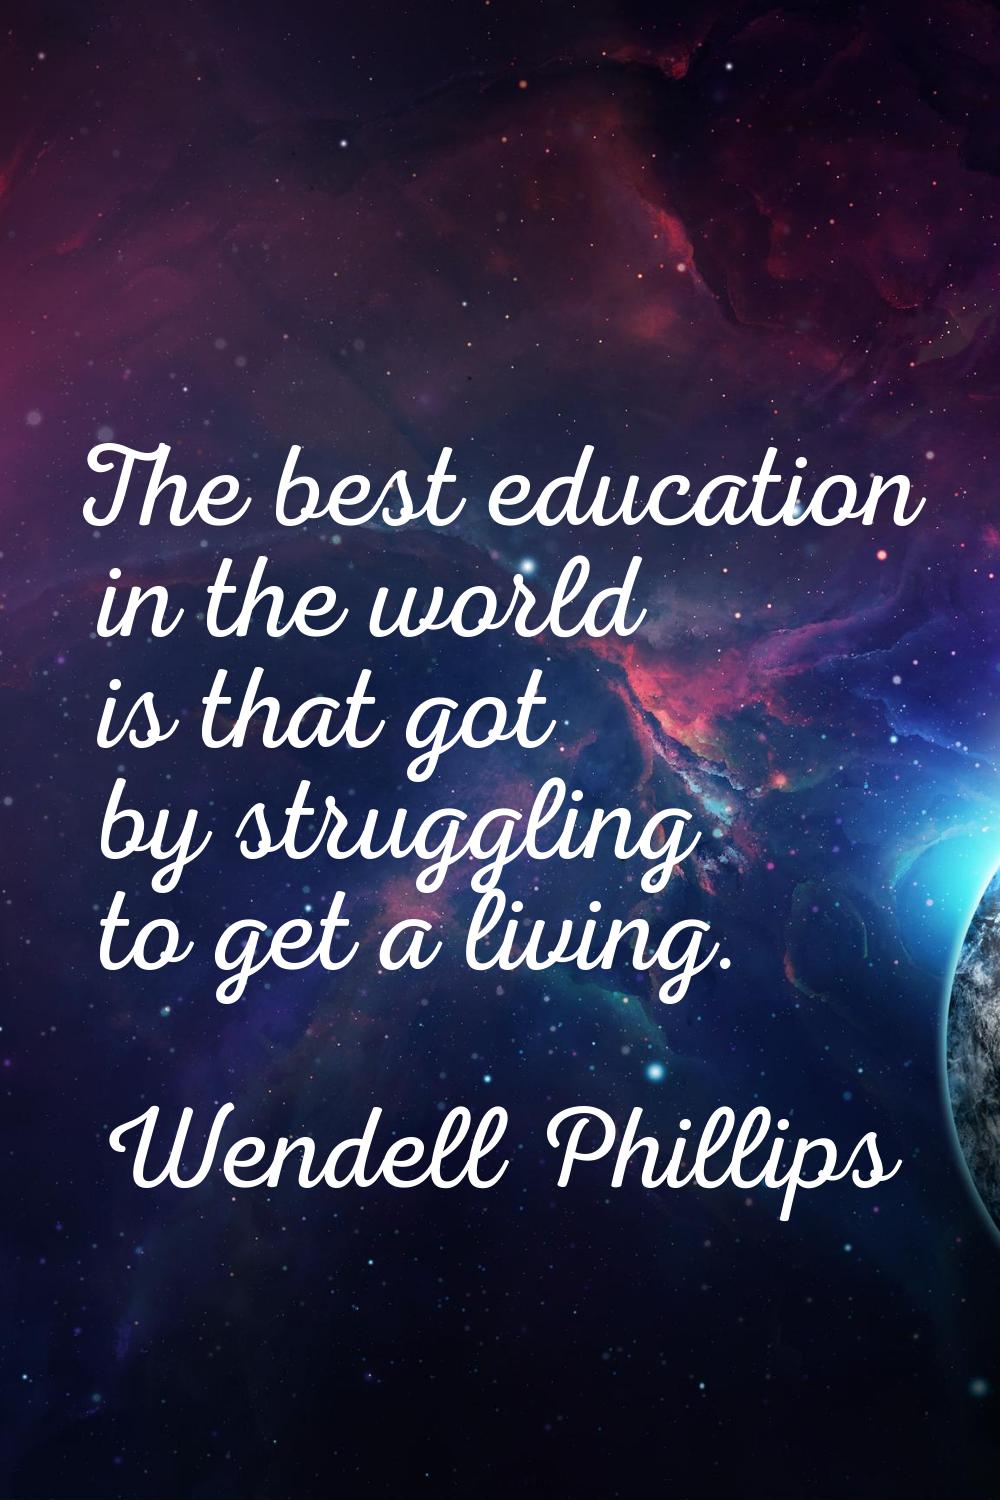 The best education in the world is that got by struggling to get a living.